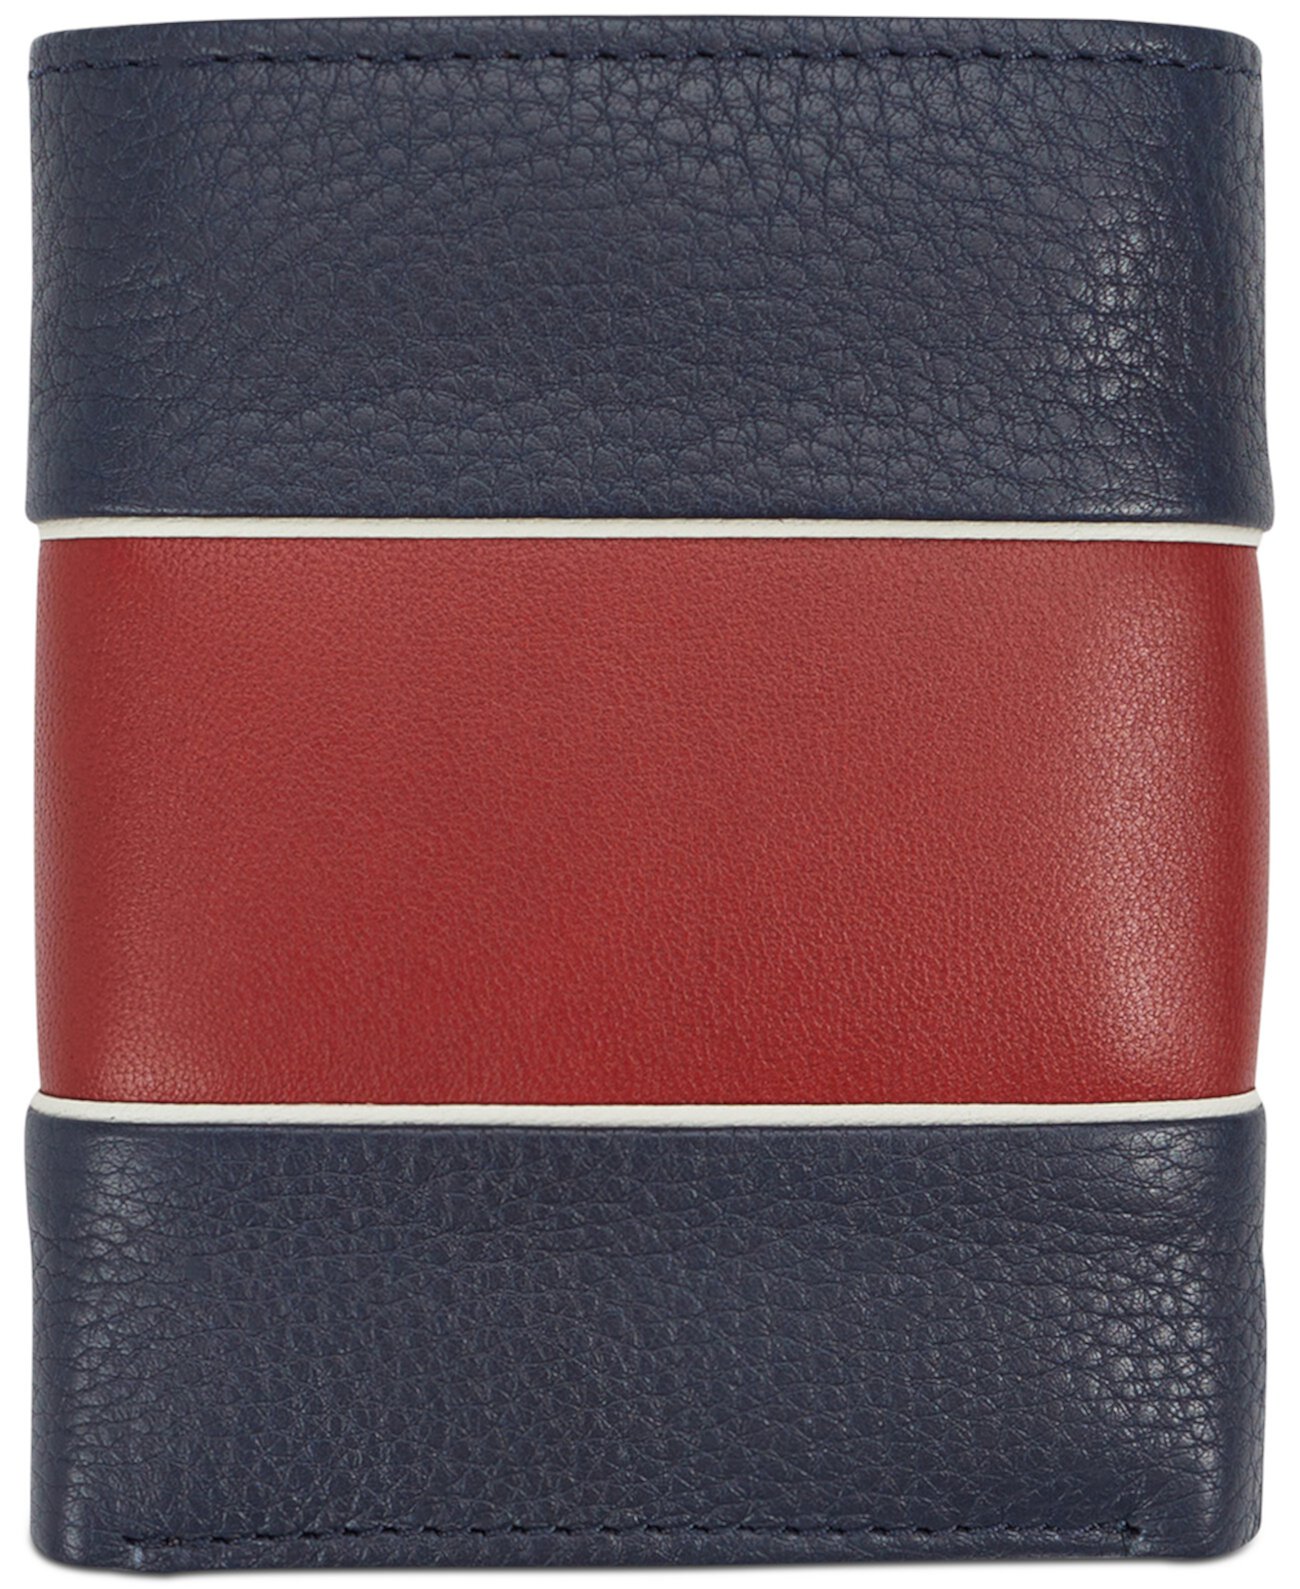 Men's RFID Trifold Wallet with Secret Zip Compartment Tommy Hilfiger